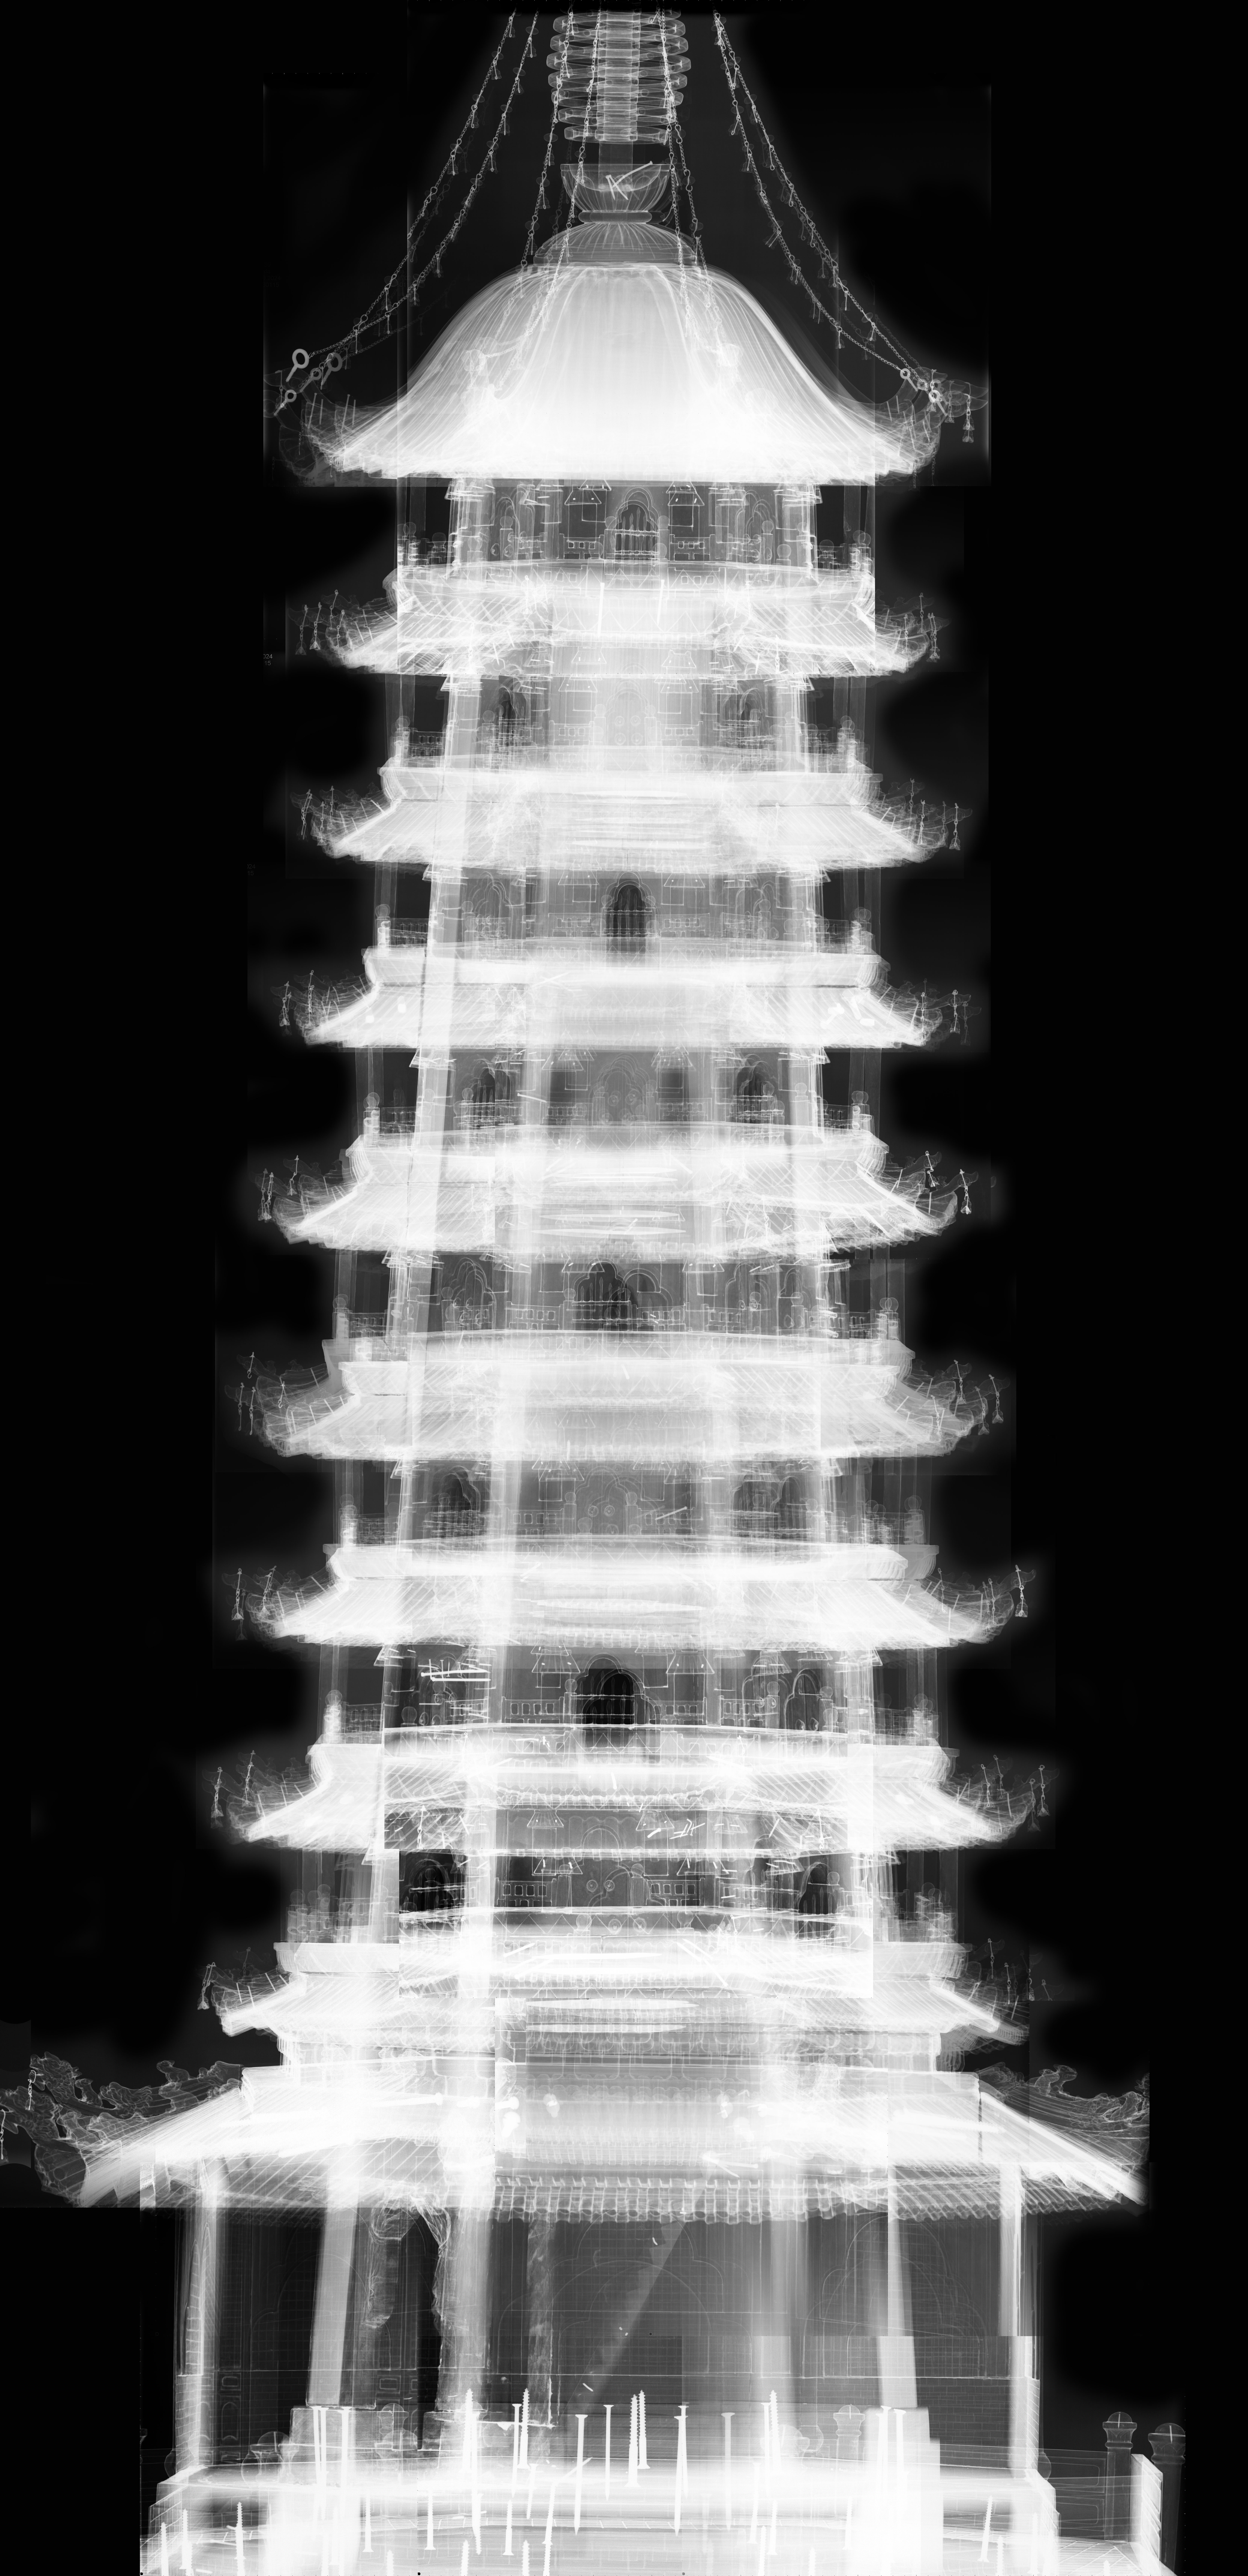 Multiple images laid side-by-side to show the pagoda imaged using x-rays.